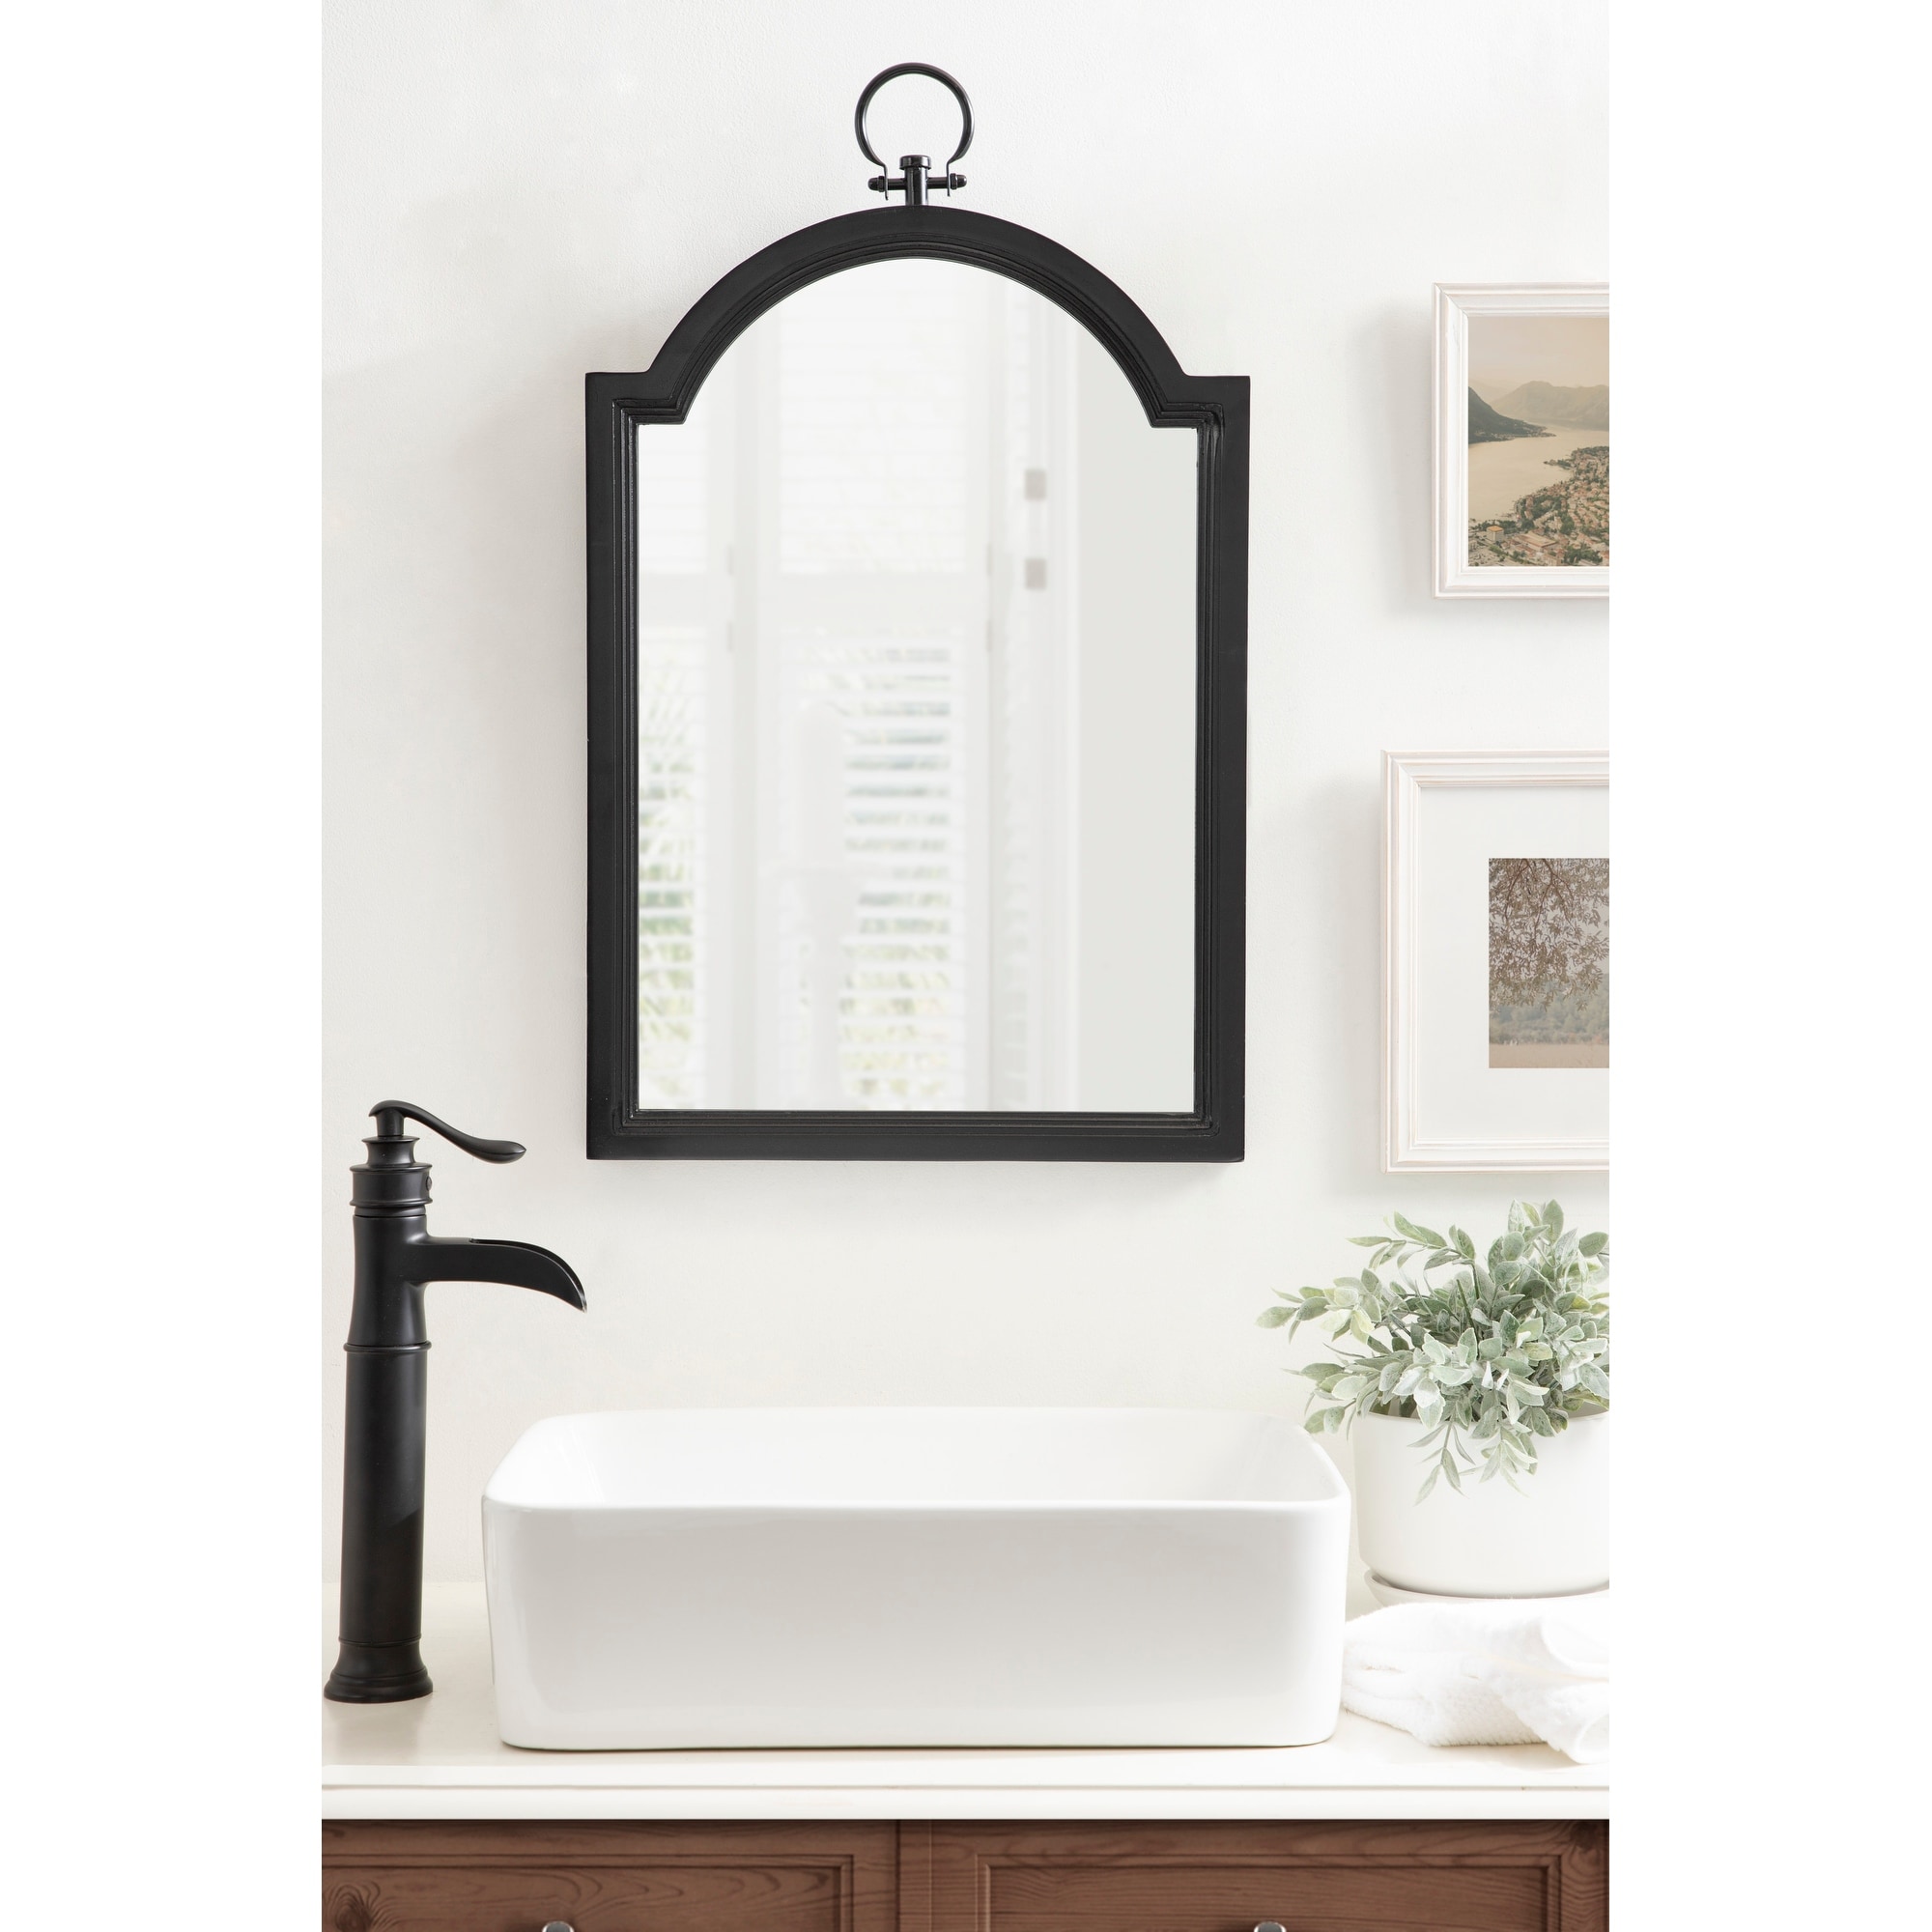 https://ak1.ostkcdn.com/images/products/is/images/direct/a375bf0b14cf2a11f9d182bd17051de830af3643/Kate-and-Laurel-Ohara-Arch-Wall-Mirror.jpg